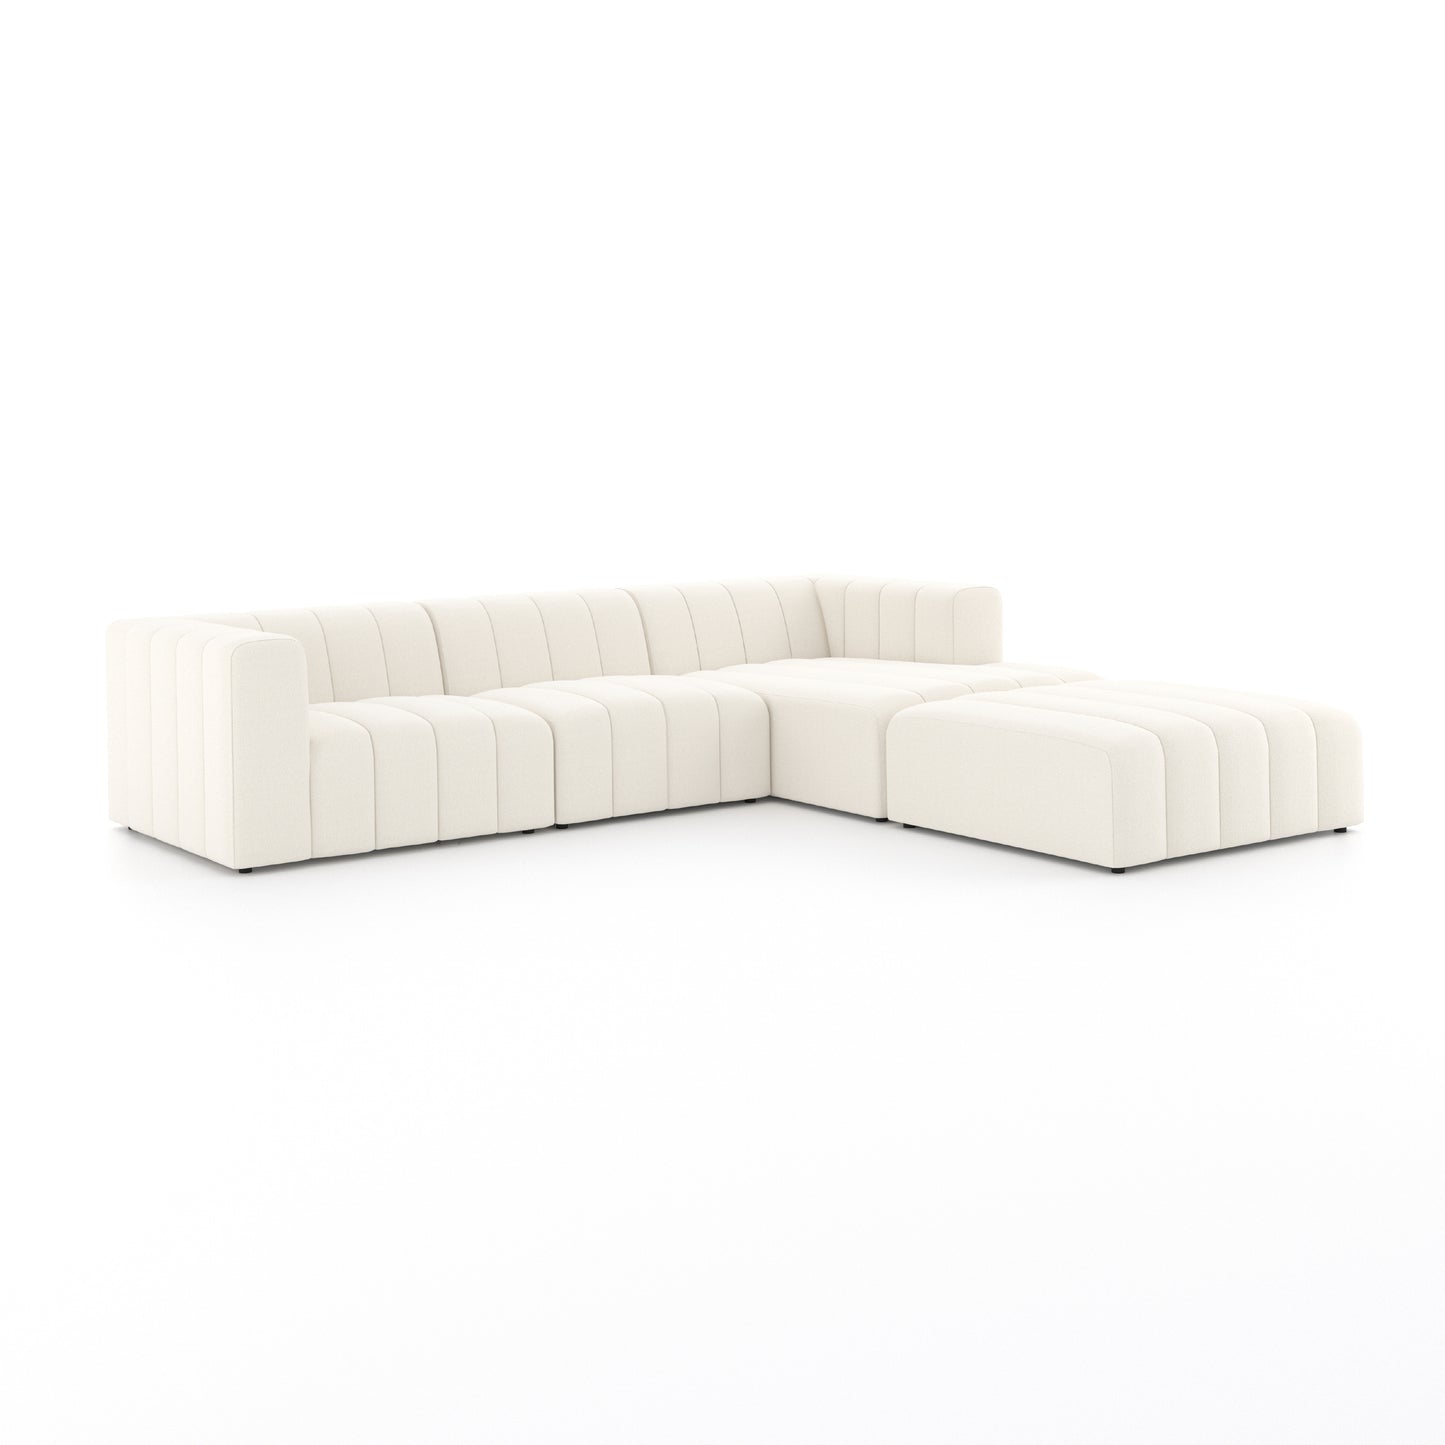 Langham Channeled 3-pc Sectional Right Arm Facing w/ Ottoman / Fayette CloudSectionals Four Hands  Right Arm Facing w/ Ottoman Fayette Cloud  Four Hands, Burke Decor, Mid Century Modern Furniture, Old Bones Furniture Company, Old Bones Co, Modern Mid Century, Designer Furniture, https://www.oldbonesco.com/